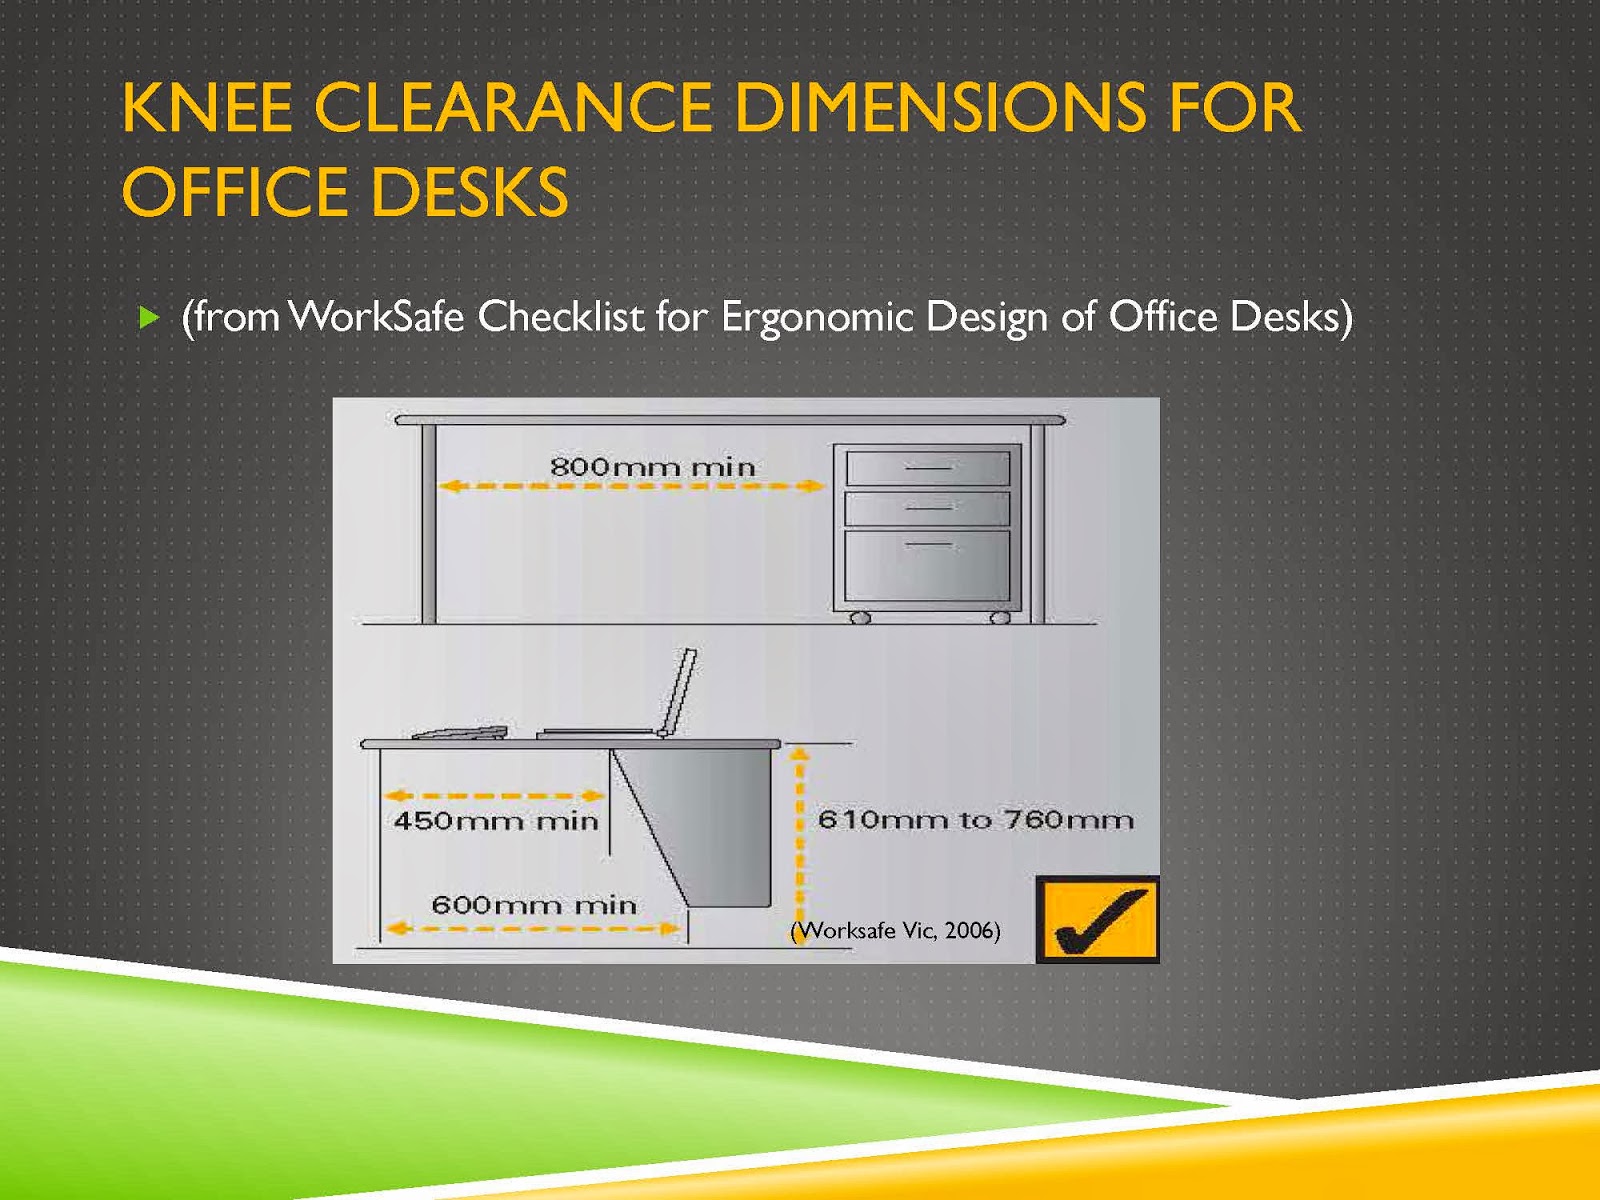 KNEE CLEARANCE DIMENSIONS FOR OFFICE DESKS